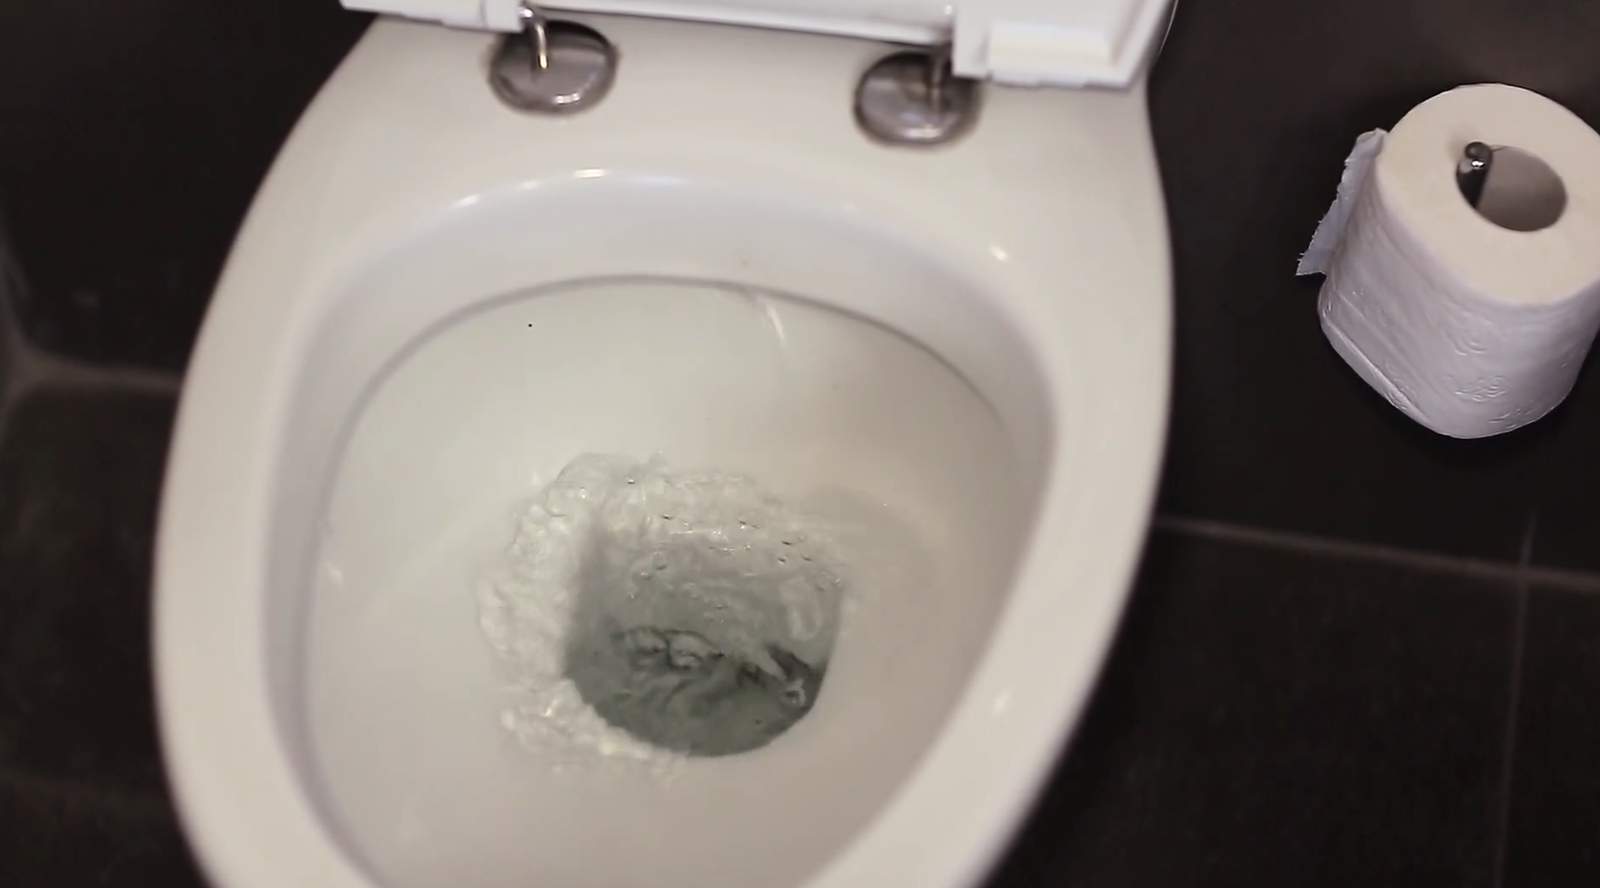 Cottonelle flushable wipes recalled due to possible bacteria contamination